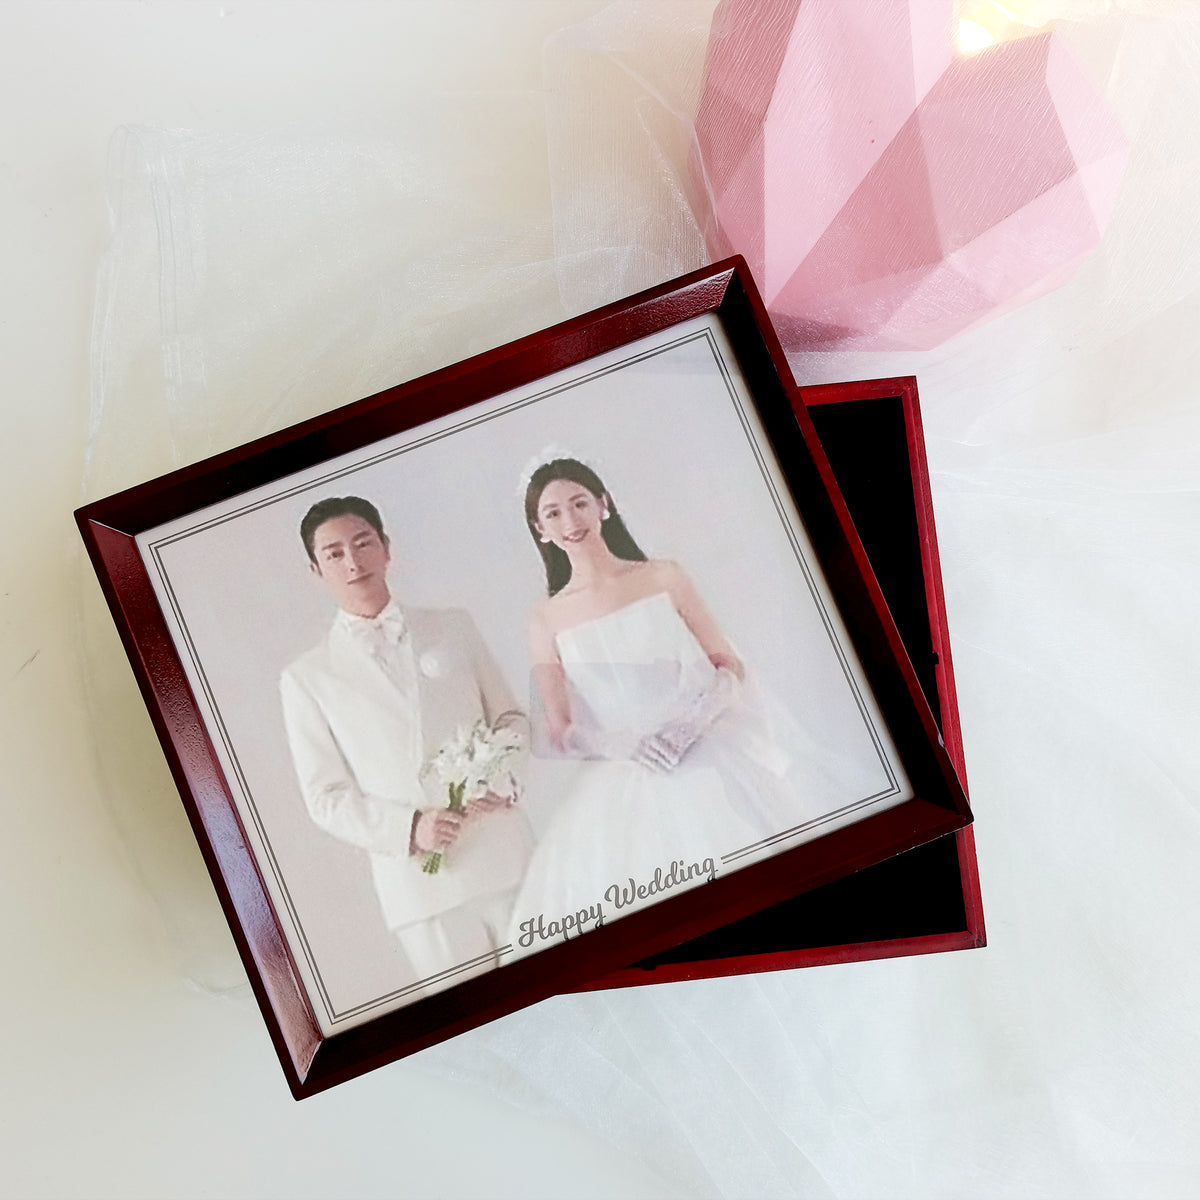 Quick Gifts|Customized gifts, wedding gifts, couple gifts, Valentine's Day gifts, esg gifts